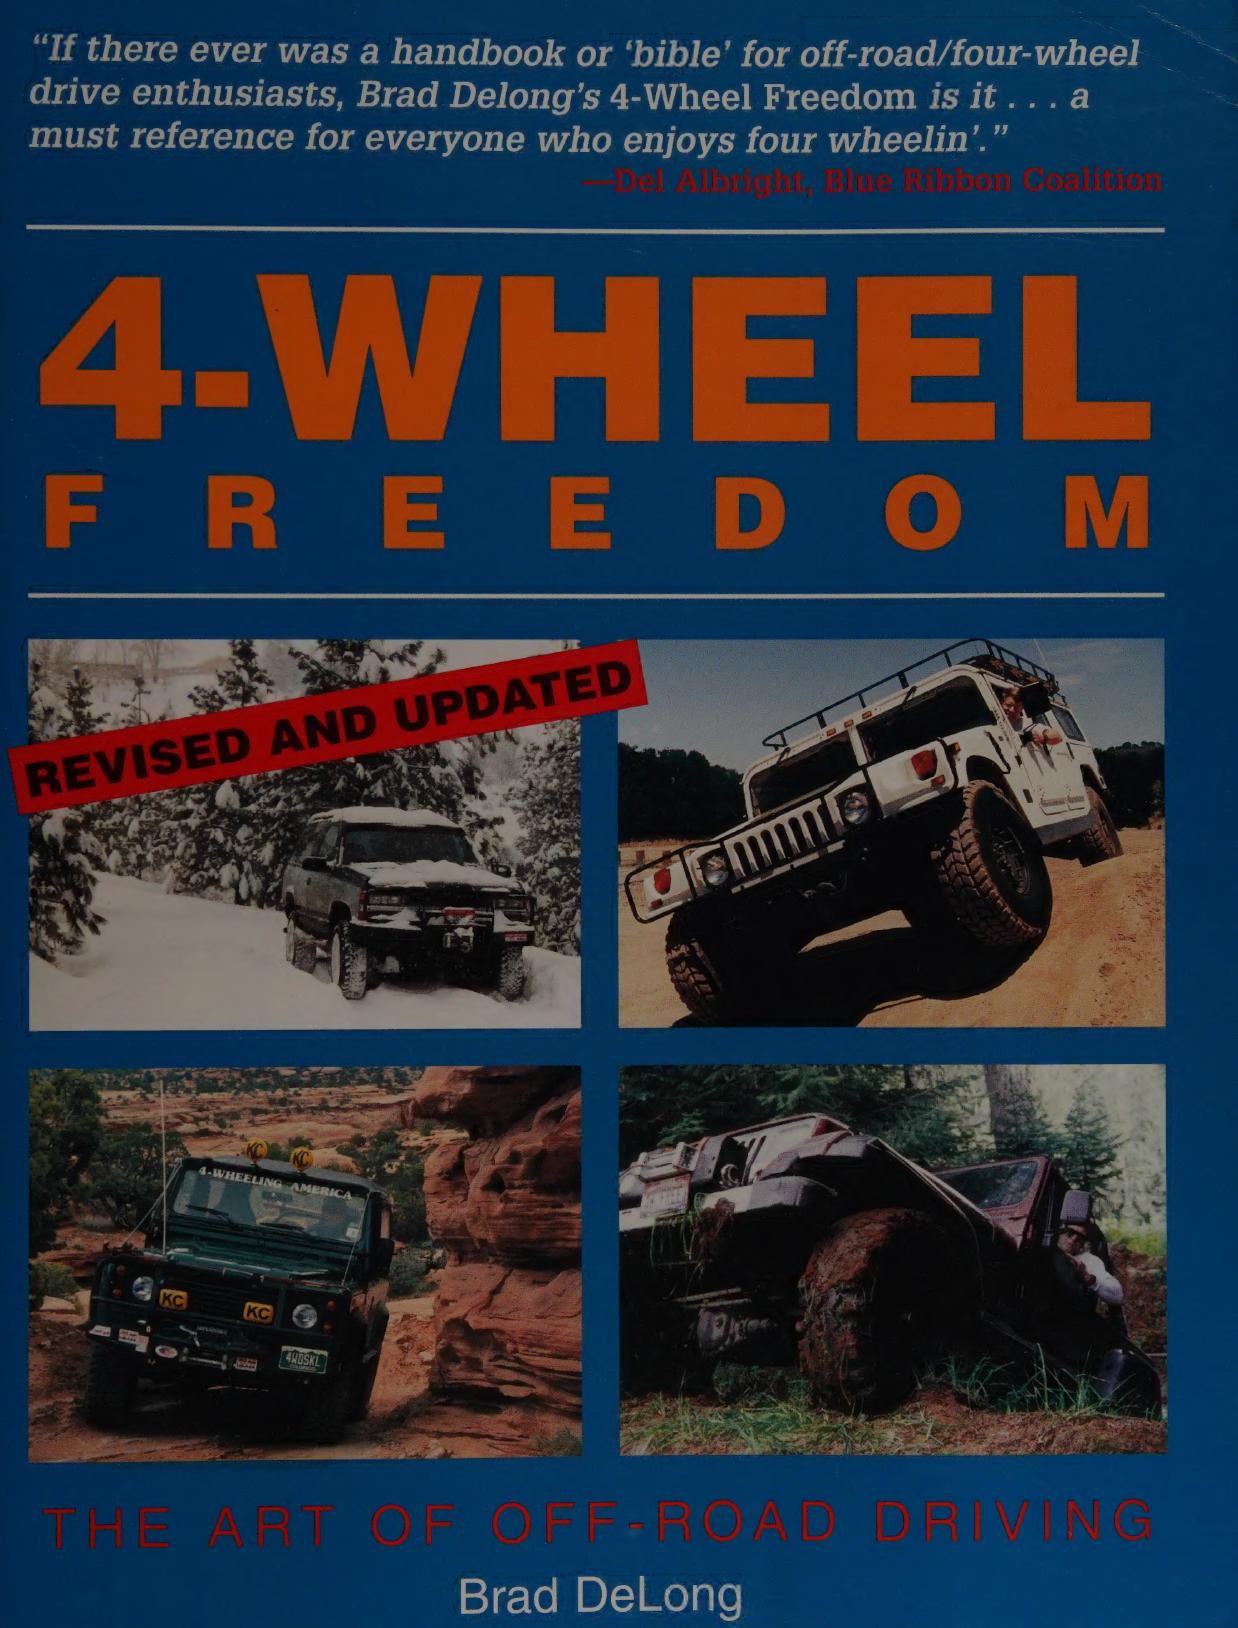 4-Wheel Freedom: The Art of Off-Road Driving by Brad DeLong